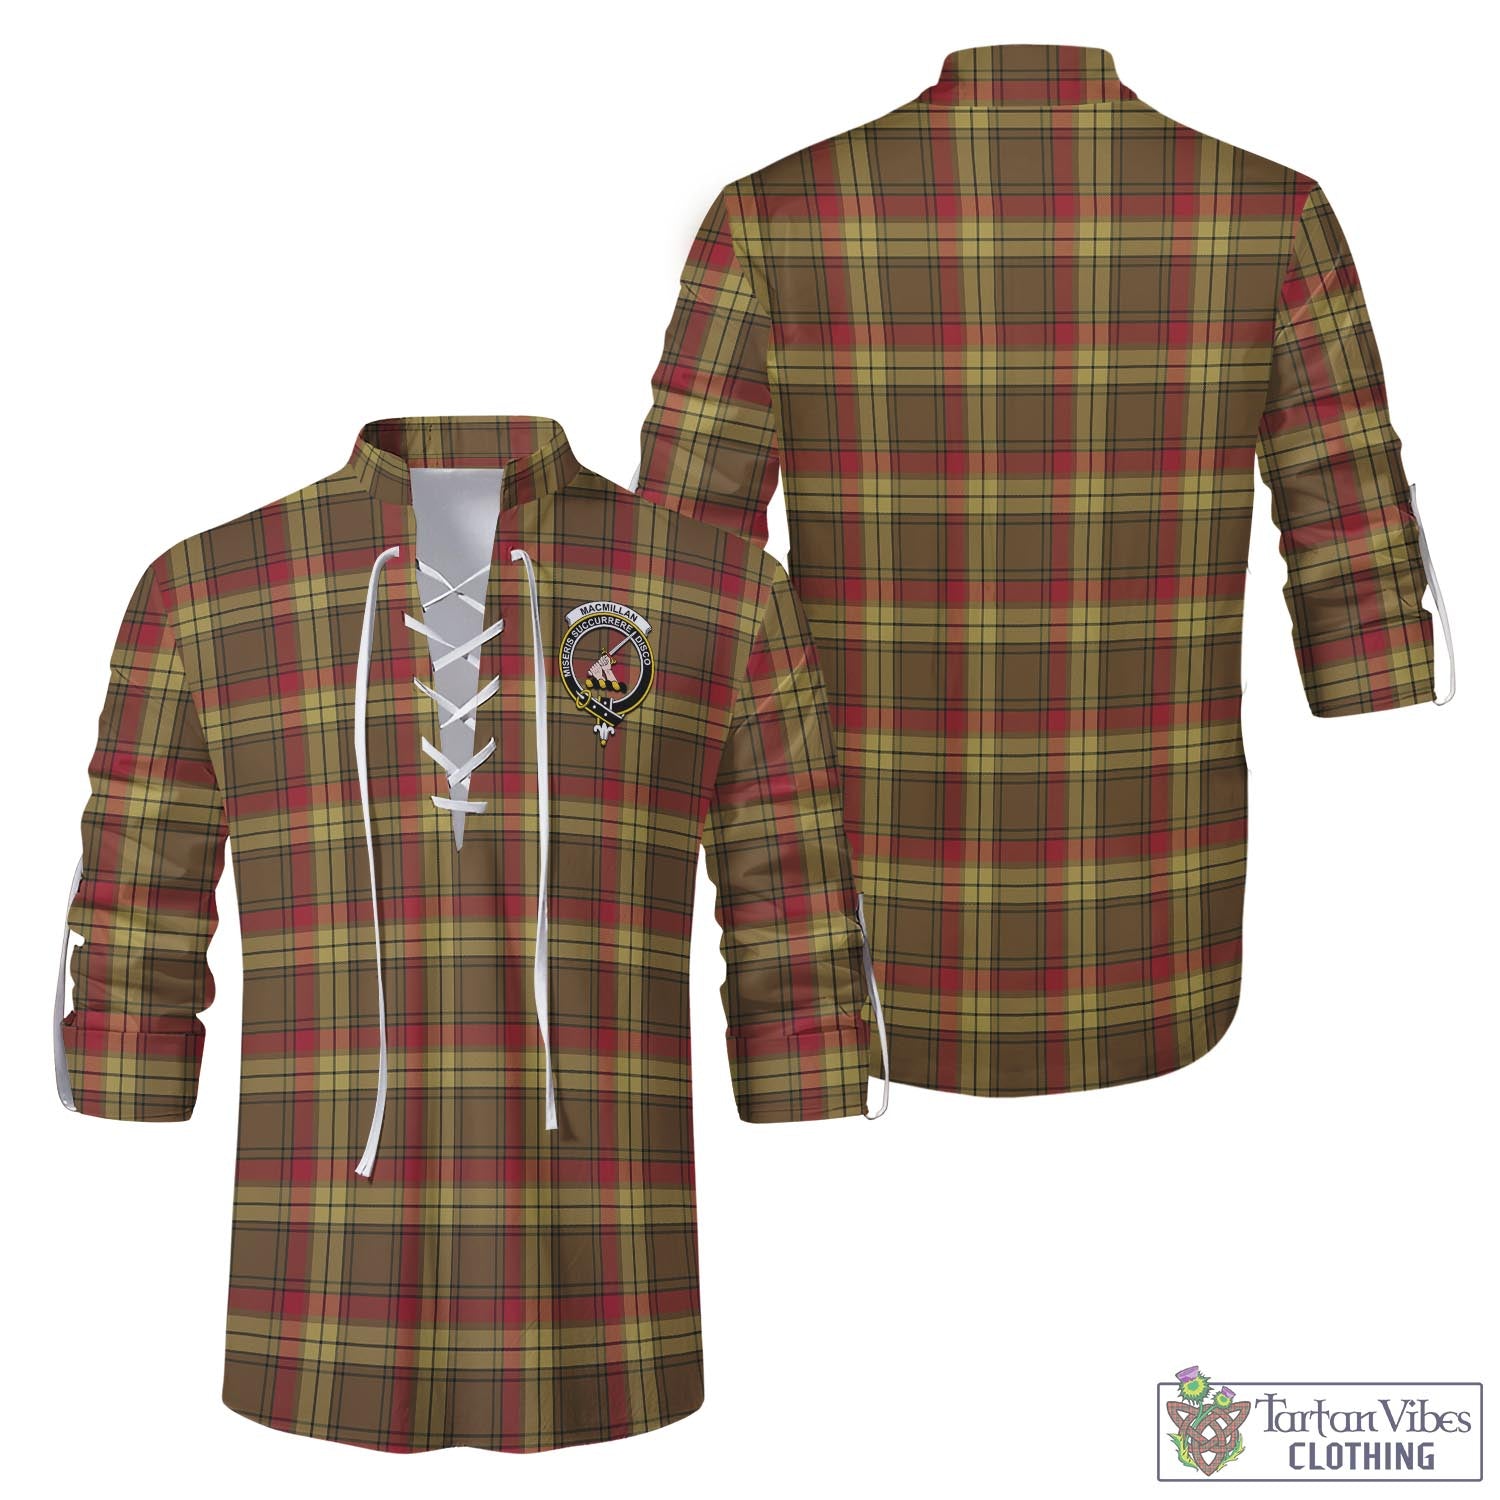 Tartan Vibes Clothing MacMillan Old Weathered Tartan Men's Scottish Traditional Jacobite Ghillie Kilt Shirt with Family Crest